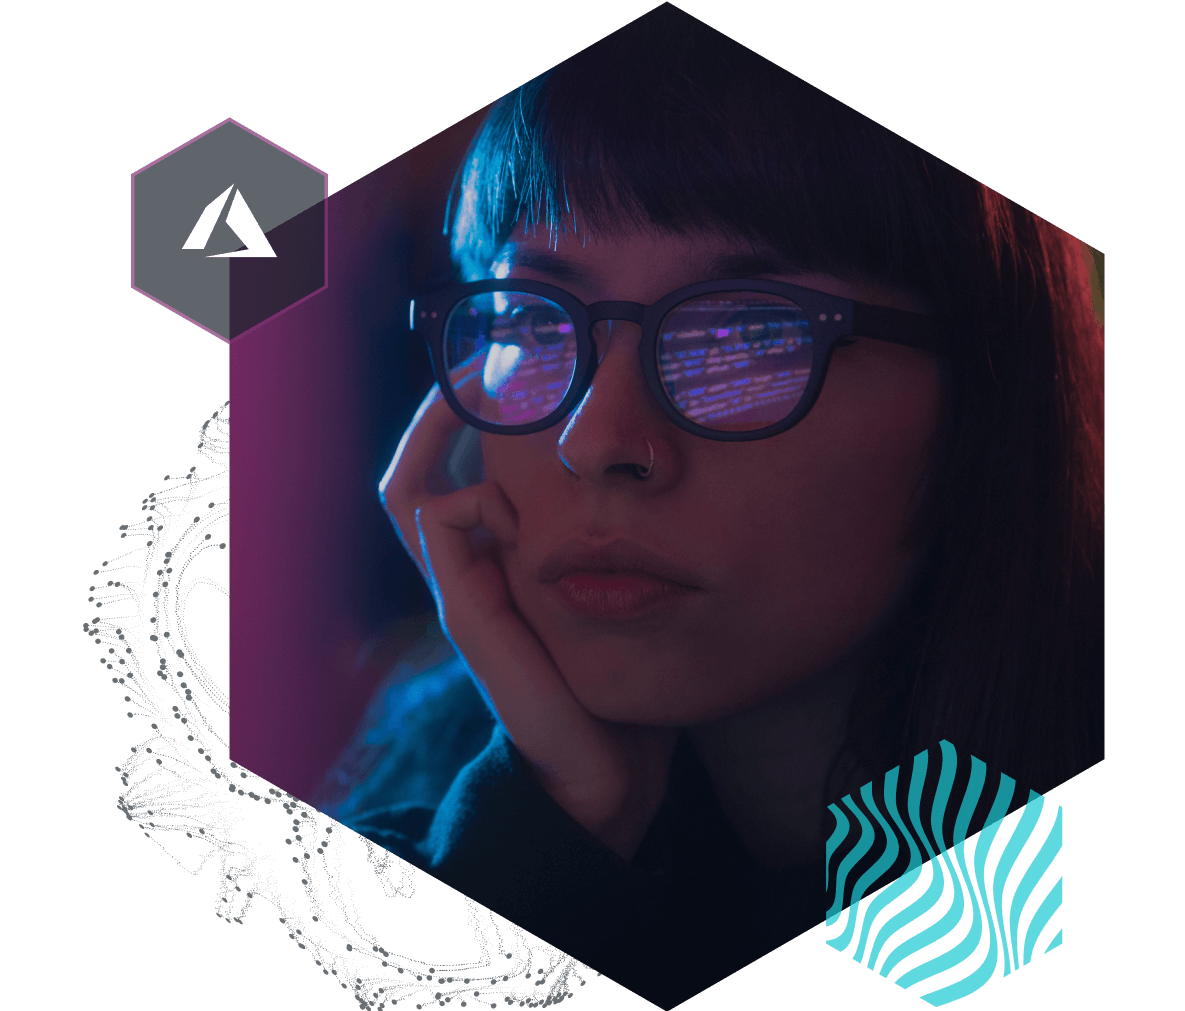 Stylized image of a woman's face with code reflected in her glasses.